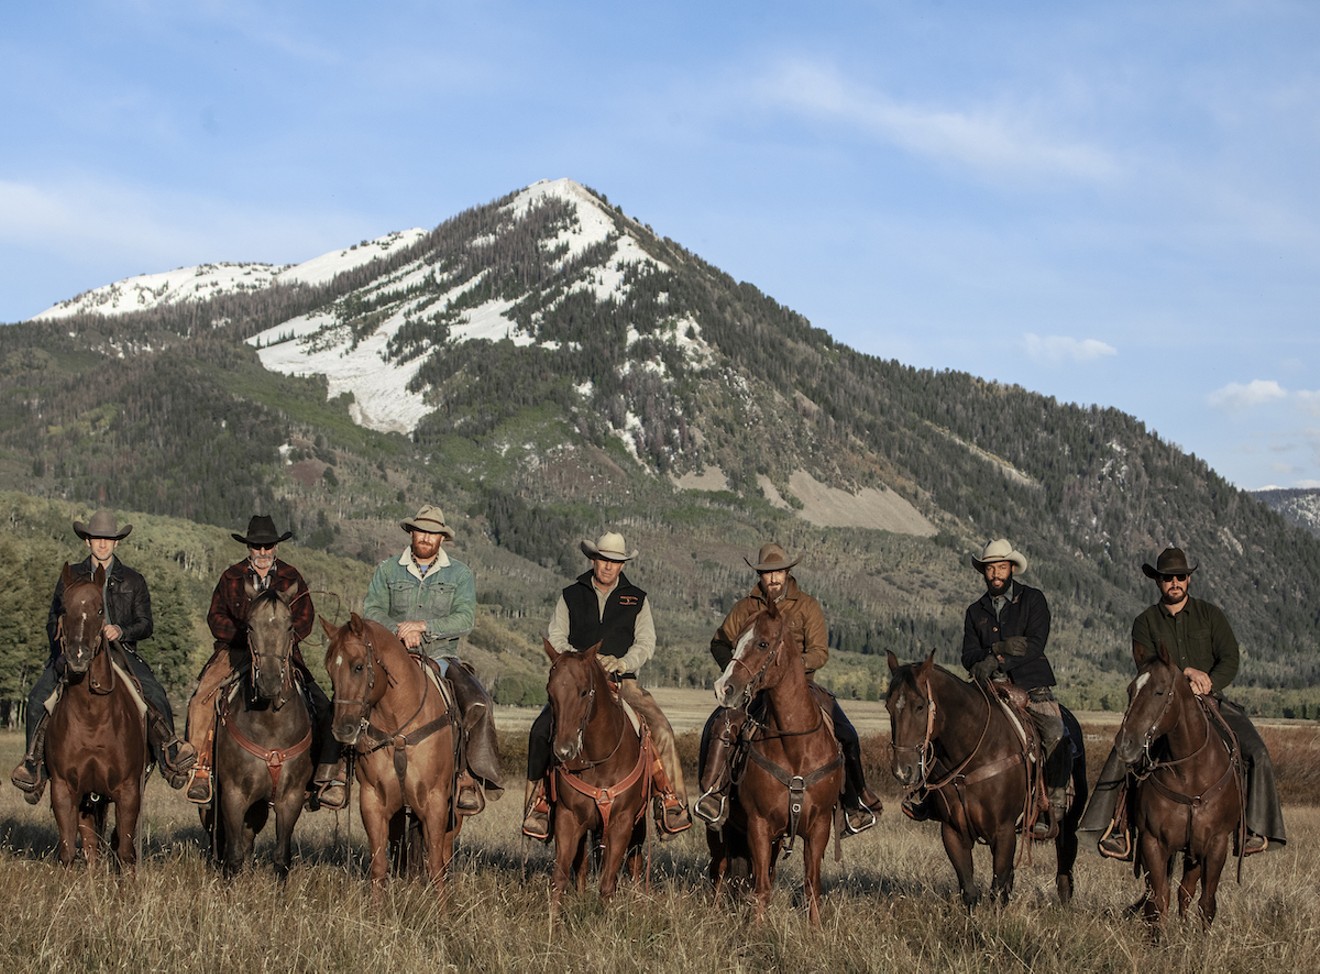 SeriesFest gallops back into Denver with a screening of Yellowstone on June 22